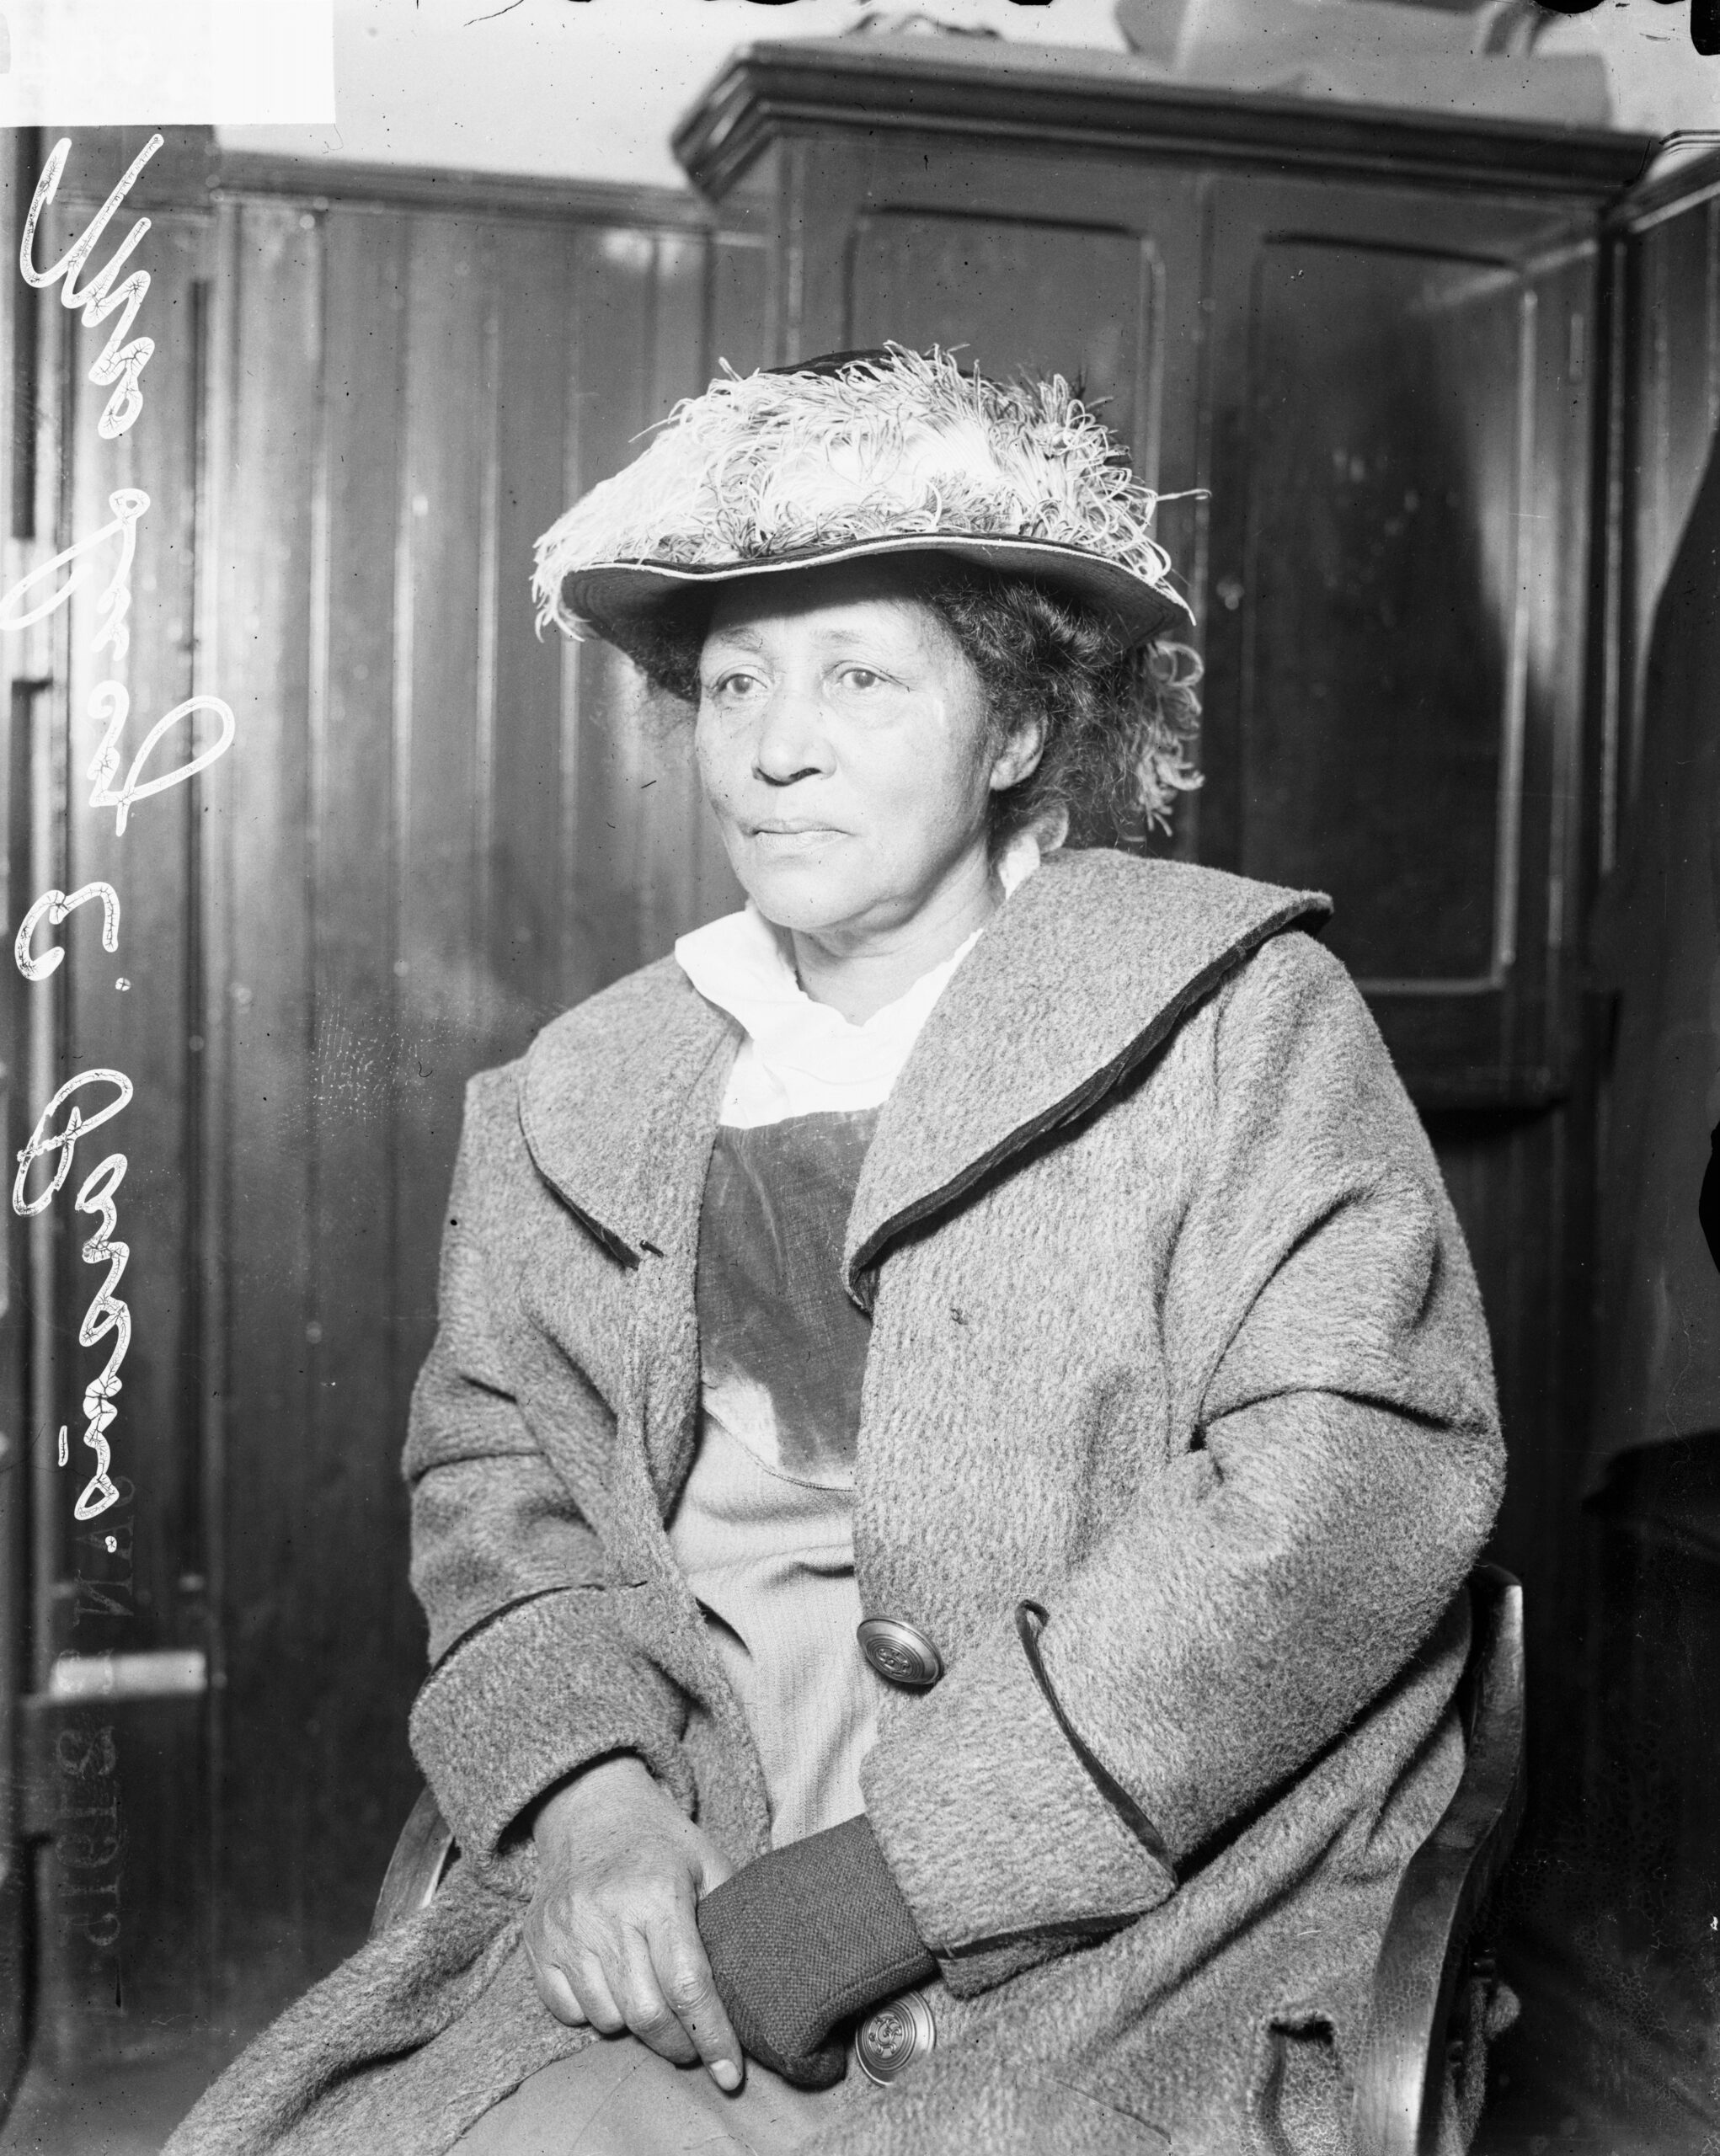 Three-quarter length portrait of Mrs. Lucy E. Parsons, arrested for rioting during an unemployment protest at Hull House in Chicago.